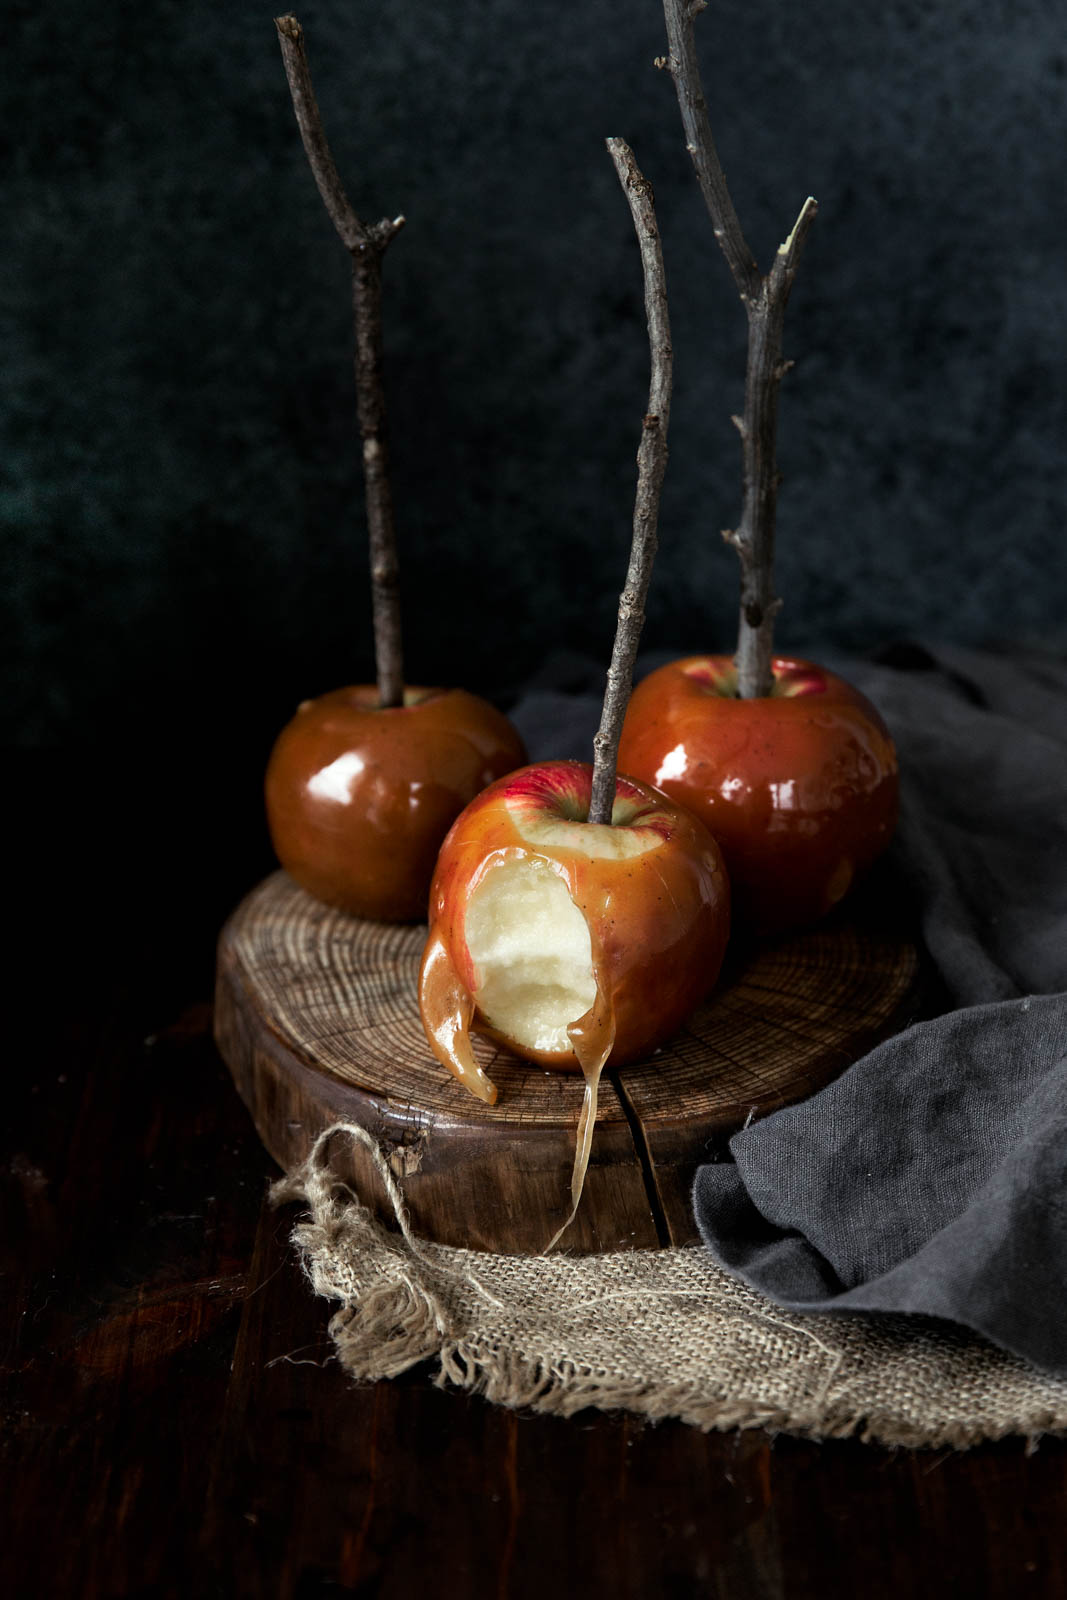 Homemade caramel apples spiked with bourbon and flavored with brown butter... uhm, YES PLEASE?!